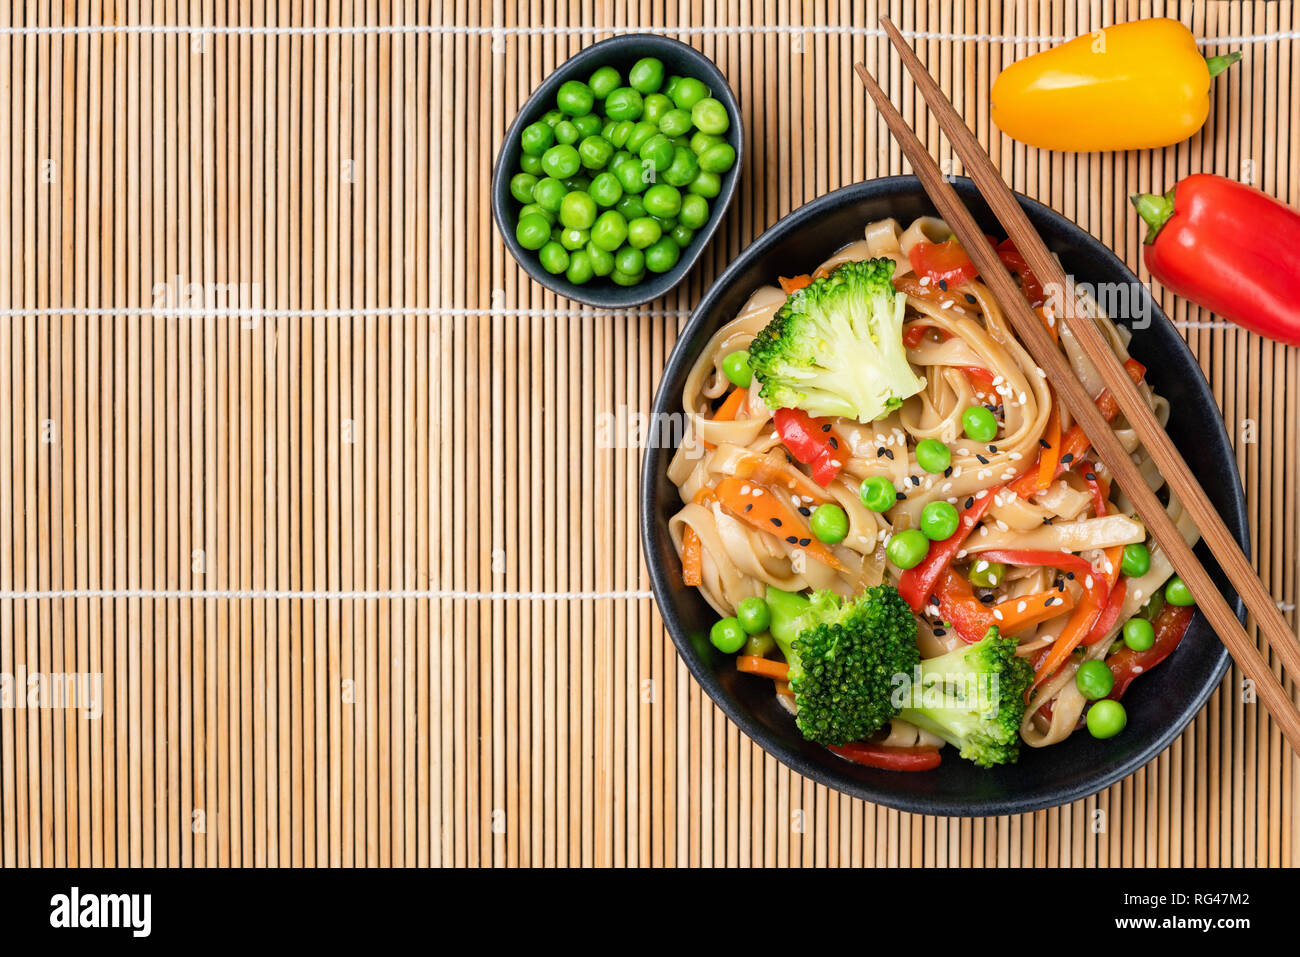 Asian noodle stir fry with vegetables and beans in bowl on bamboo background. Top view Stock Photo